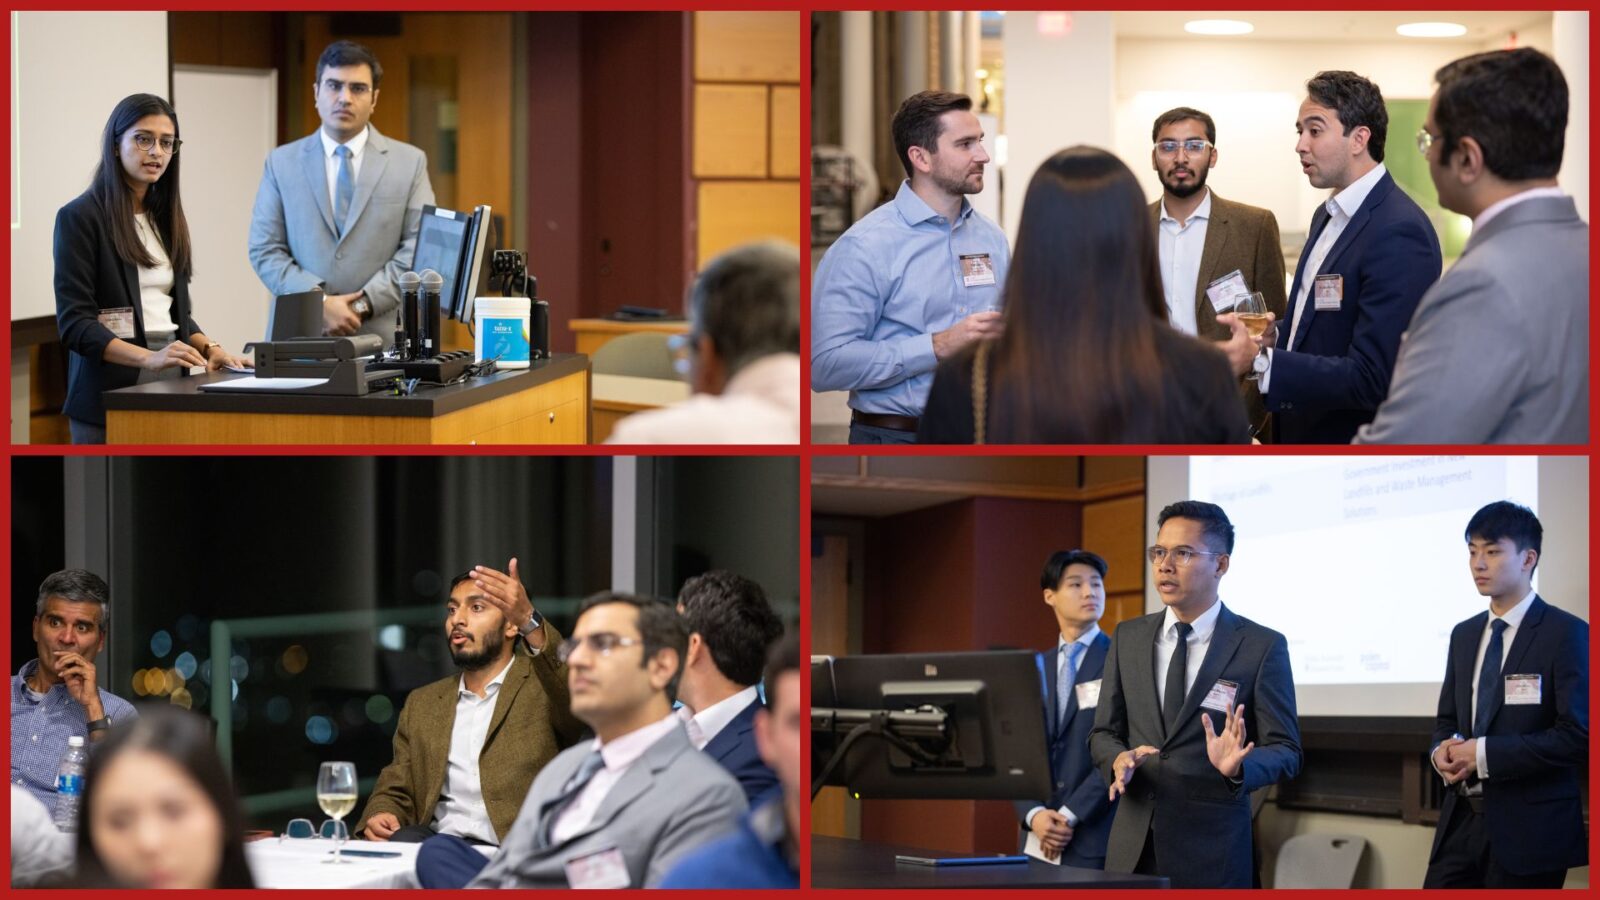 Four images from the MBA Stock Pitch Challenge 2023. Top right: two students pitching a stock. Top left: four students networking with a sponsor representative. Bottom left: student asking a question to the keynote speaker at dinner. Bottom right: a student leading a pitch.